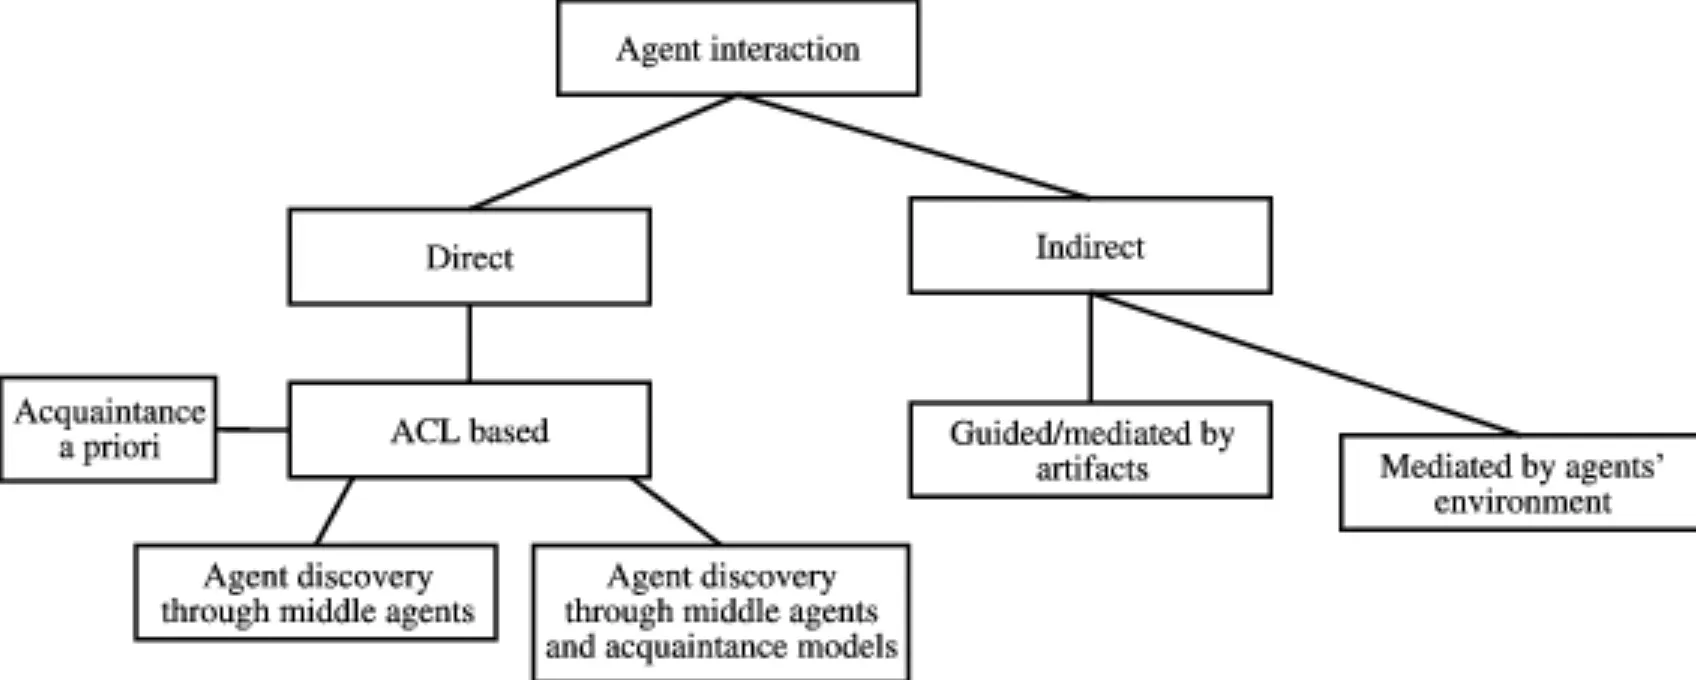 Core Concepts of Agent Interaction